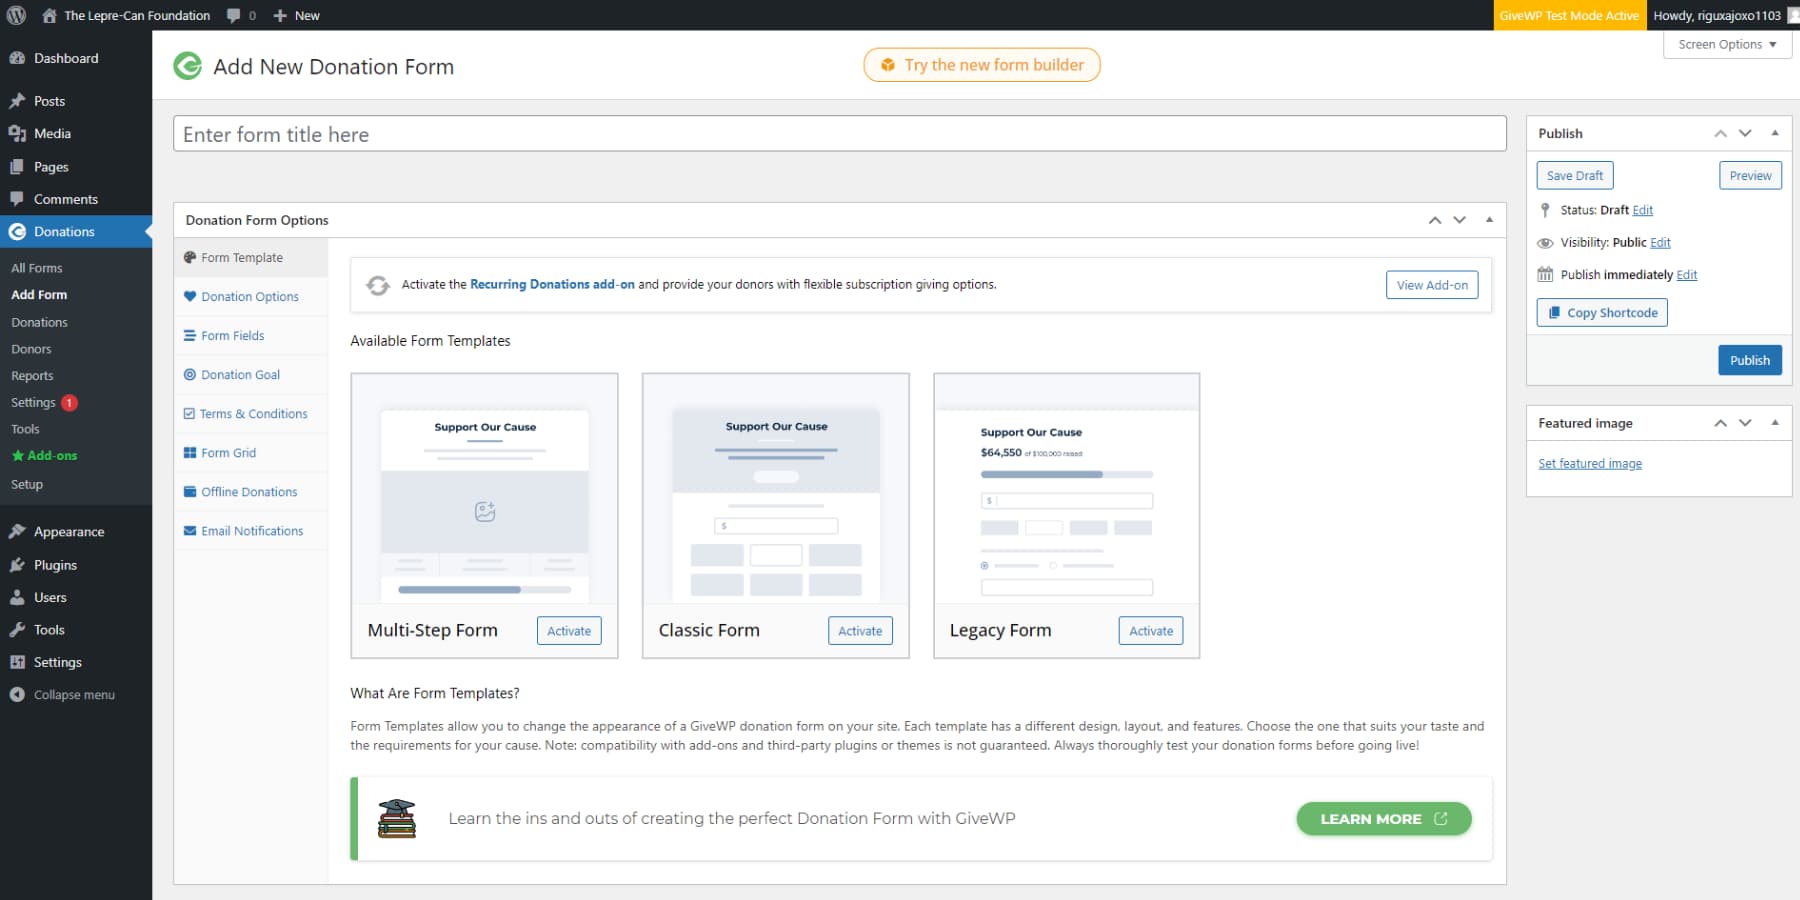 A screenshot of GiveWP's user interface